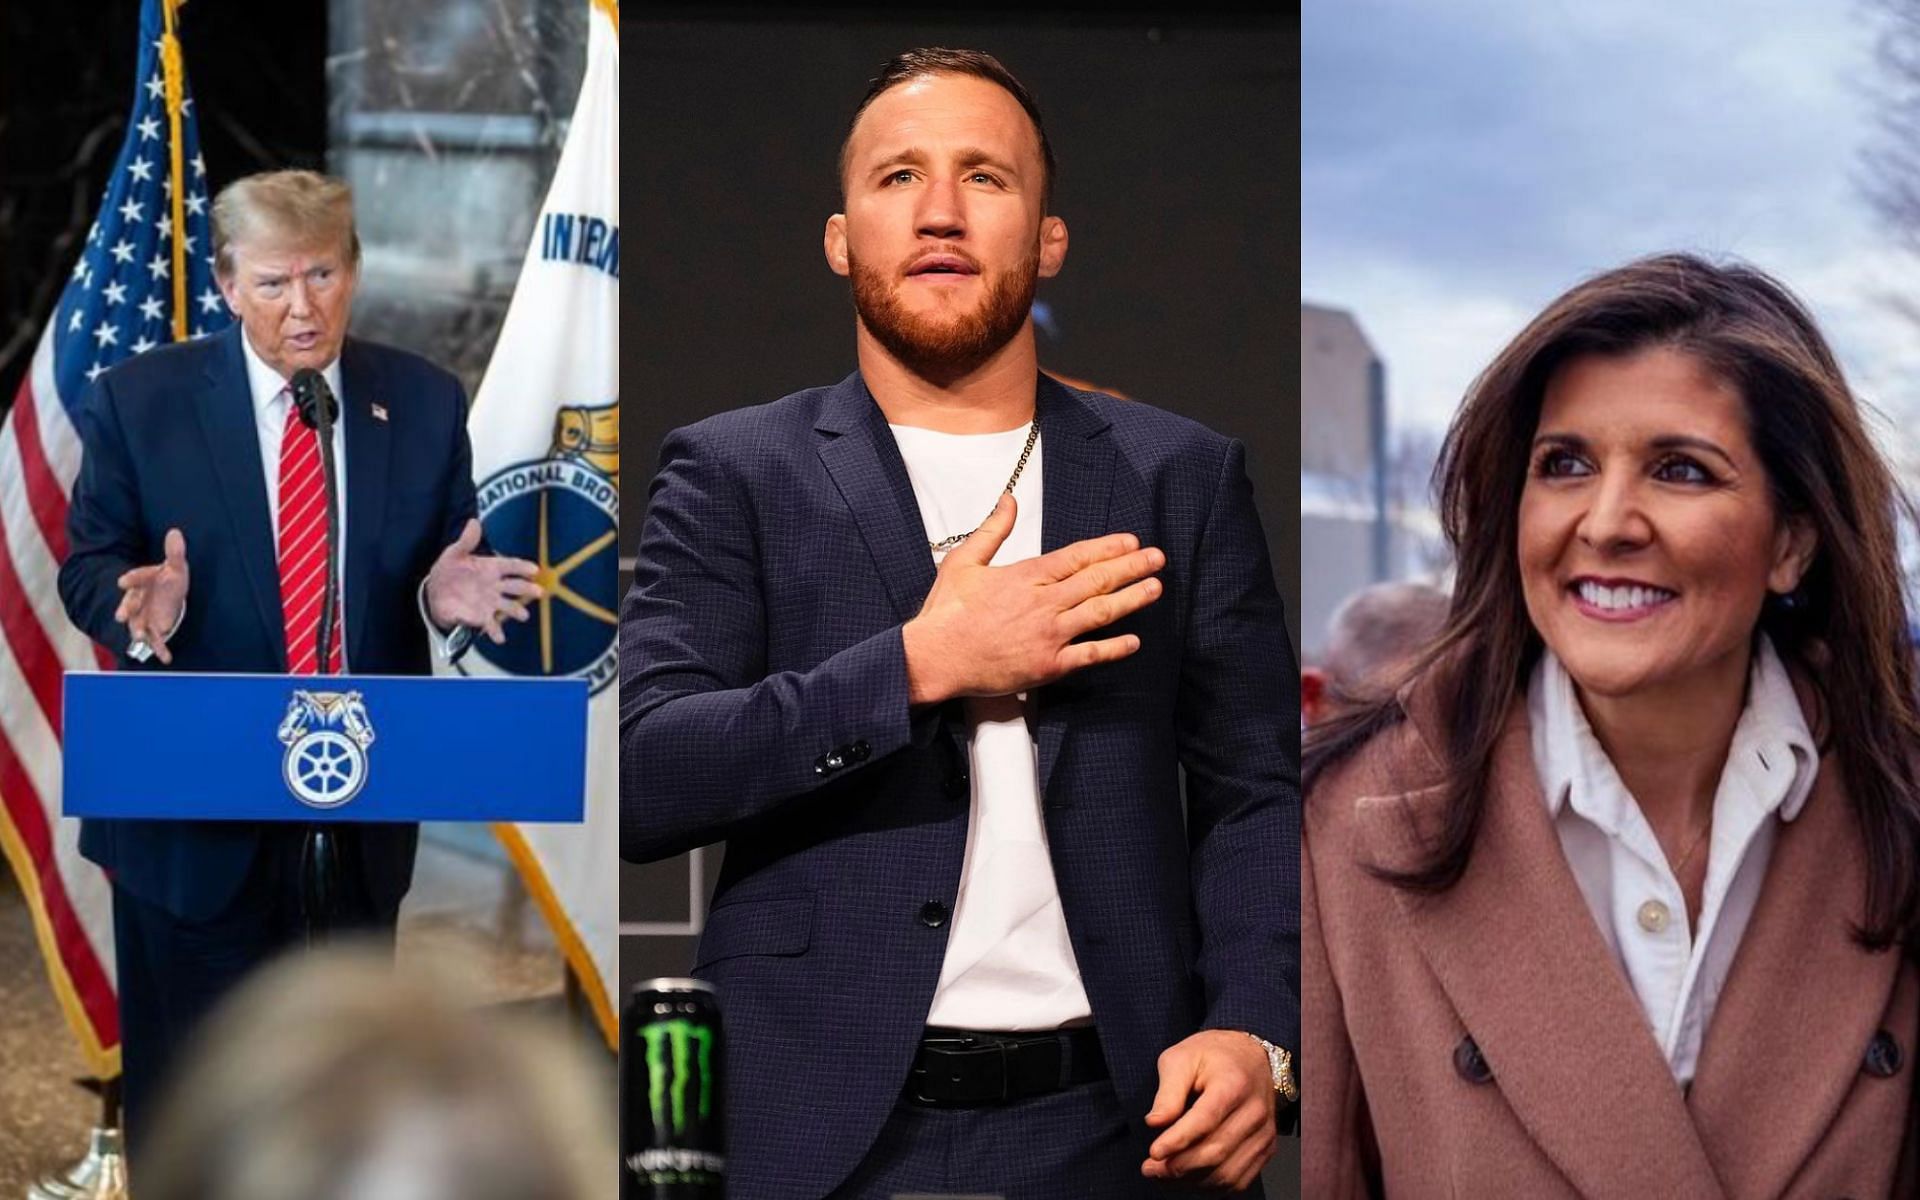 Justin Gaethje (center) fires back at Nikki Haley (right) in seeming support of Donald Trump (left) [Photo Courtesy @justin_gaethje, @realdonaldtrump and @nikkihaley on Instagram]